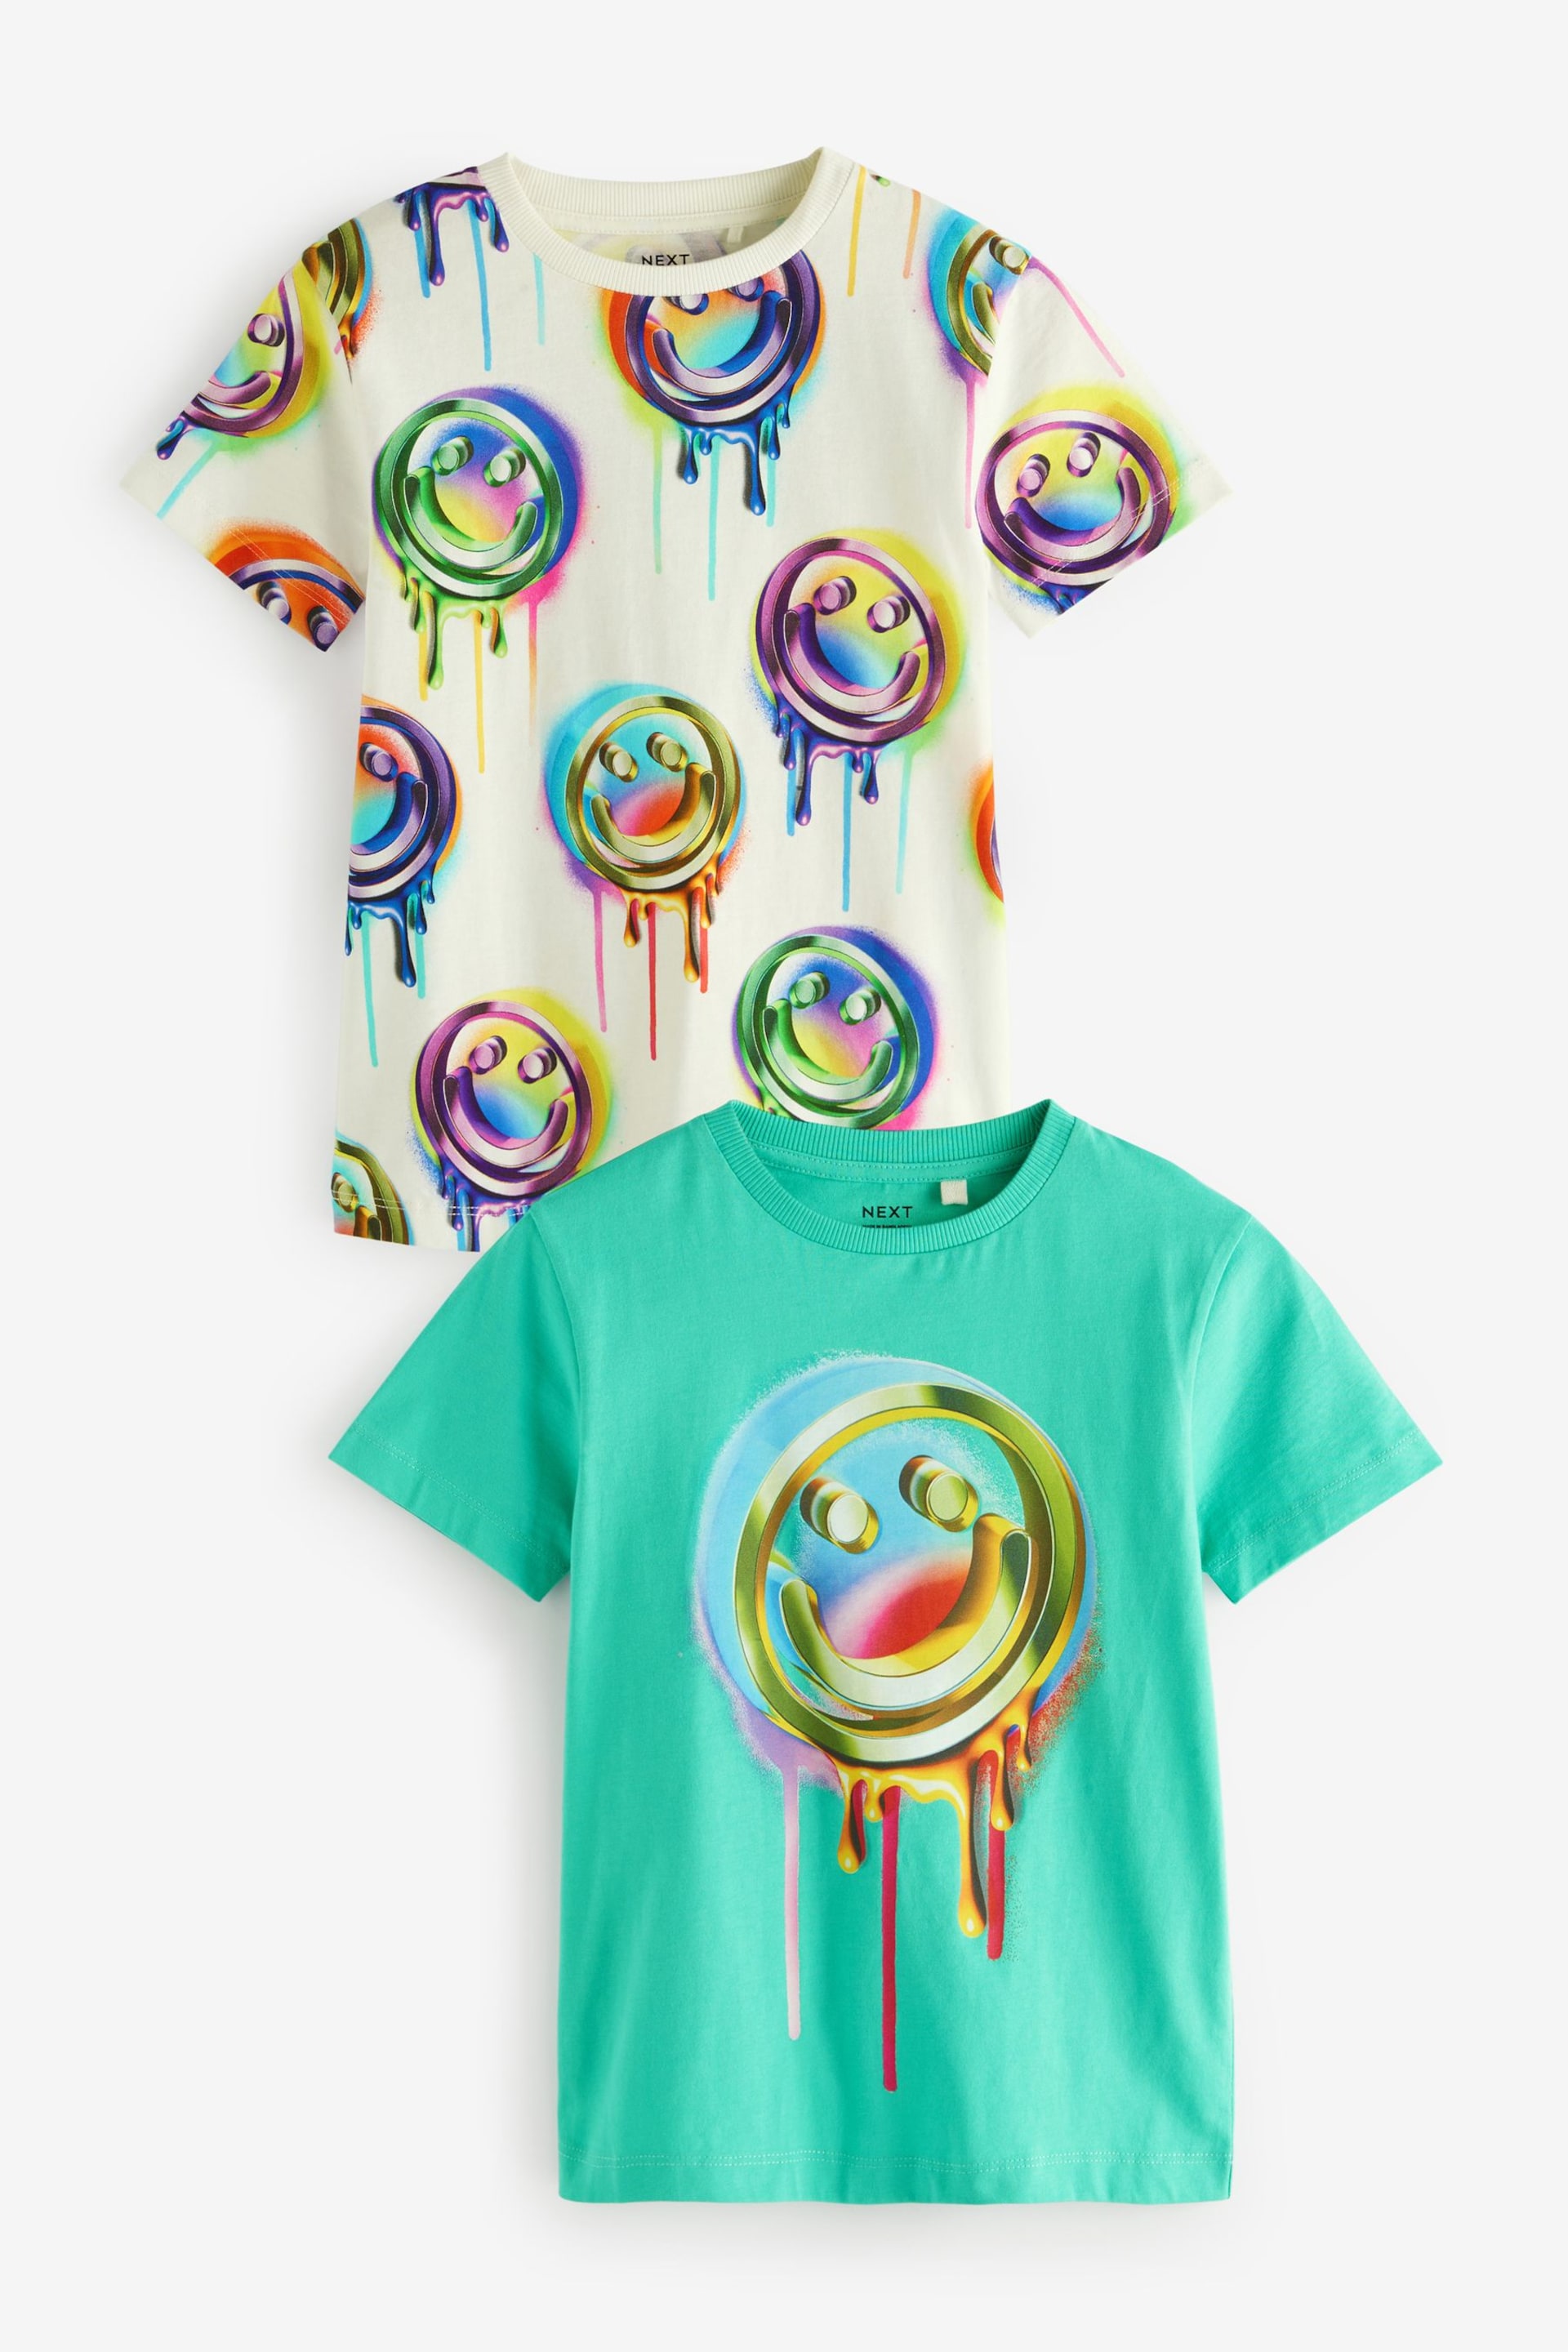 Green/White Drippy Smile Graphic Short Sleeve T-Shirts 2 Pack (3-16yrs) - Image 1 of 5